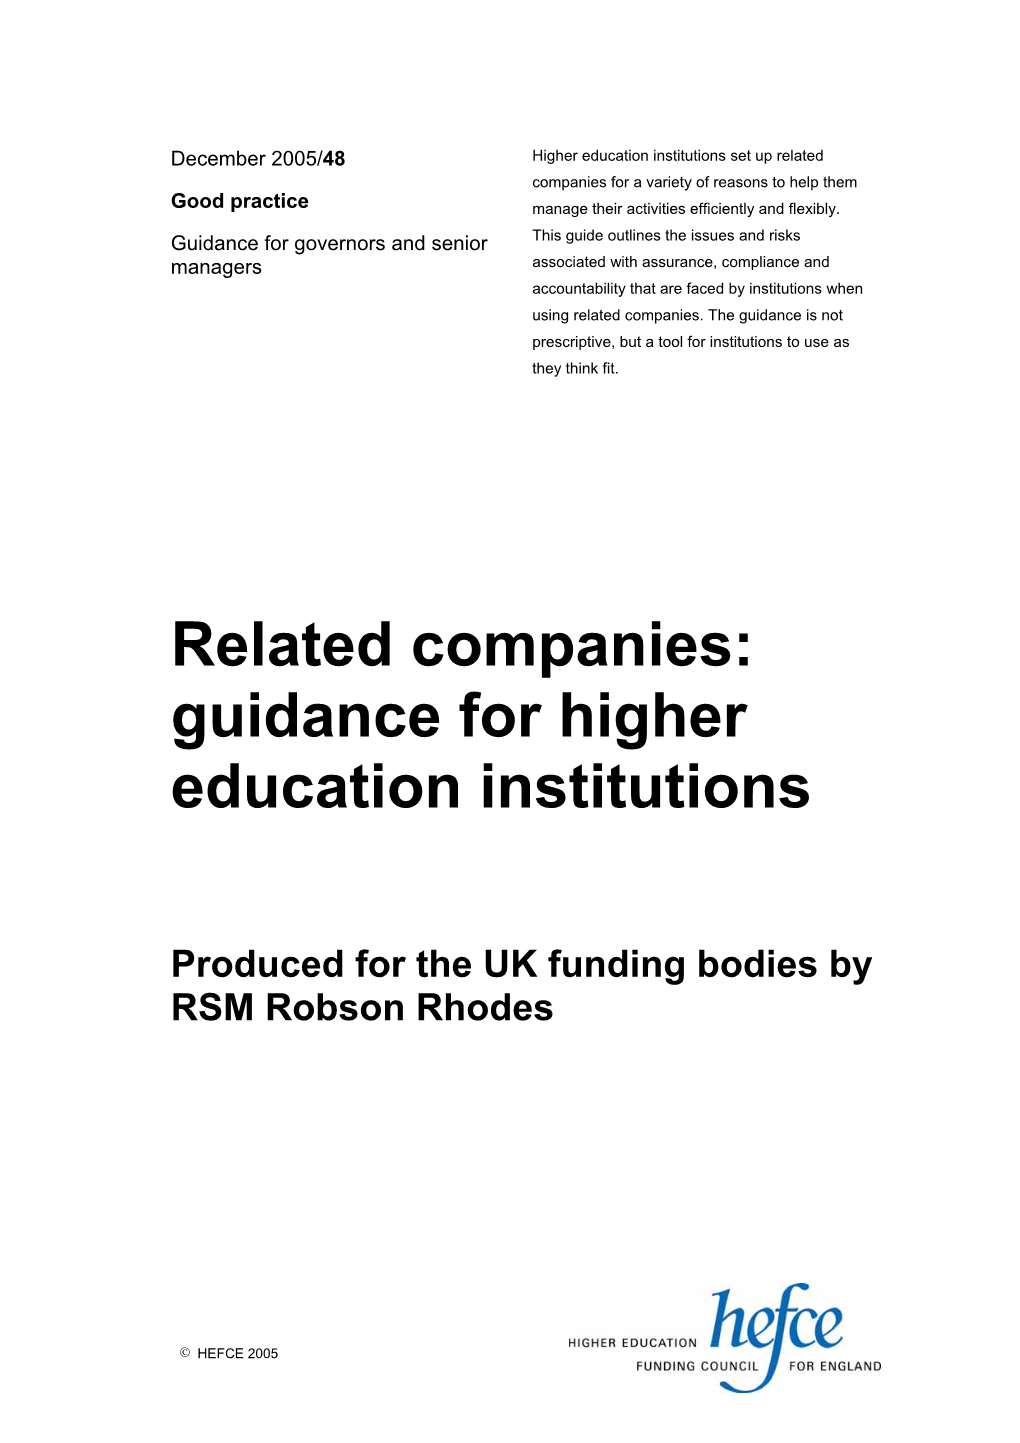 Related Companies: Guidance for Higher Education Institutions